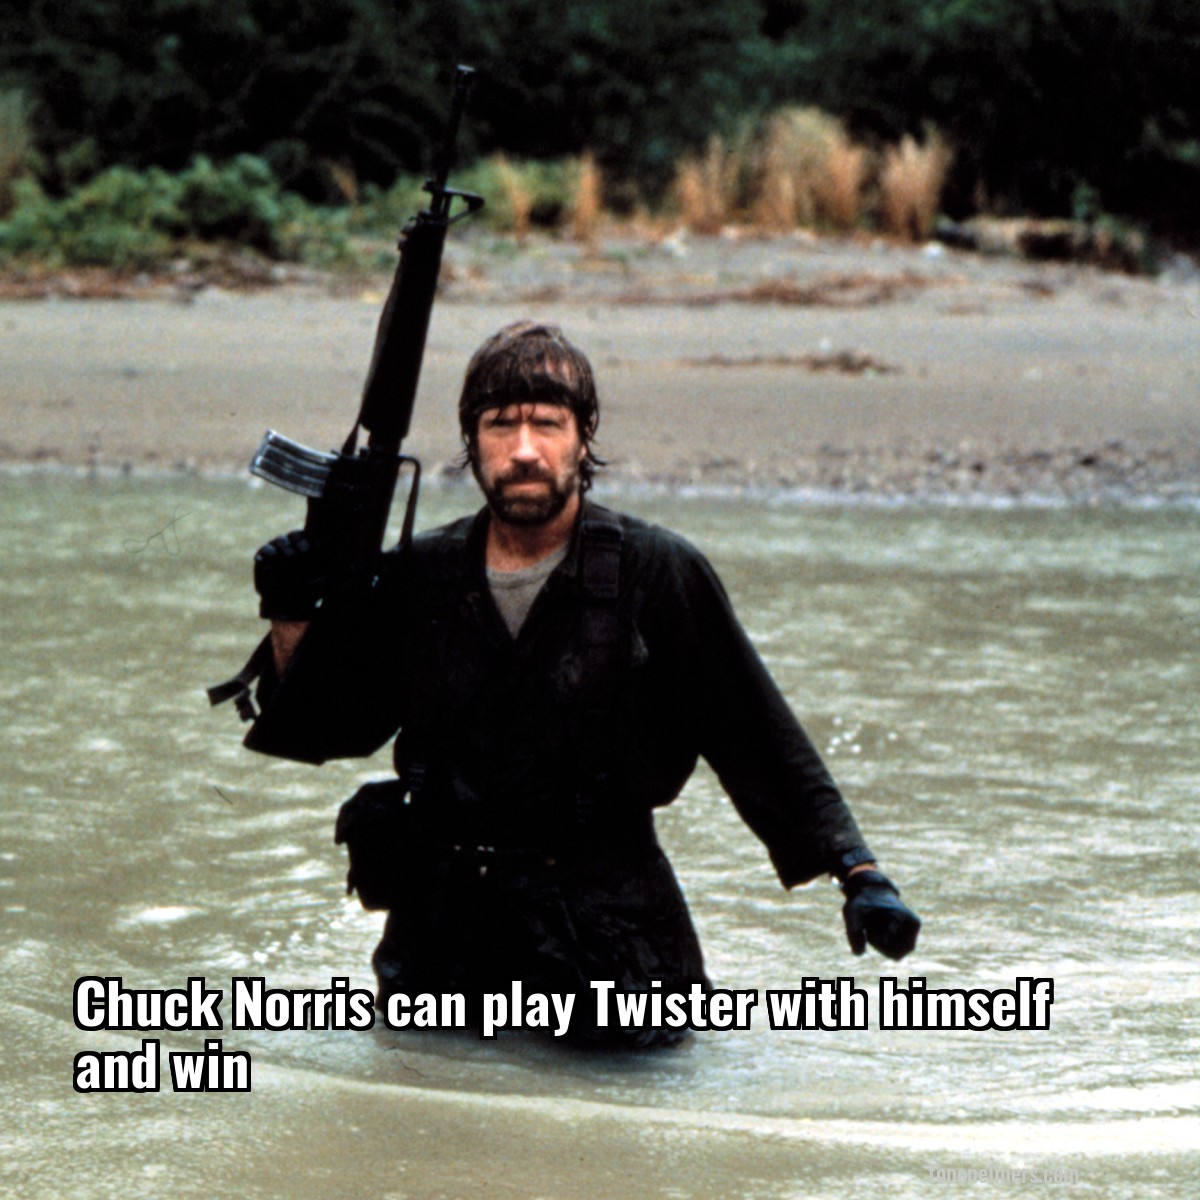 Chuck Norris can play Twister with himself and win